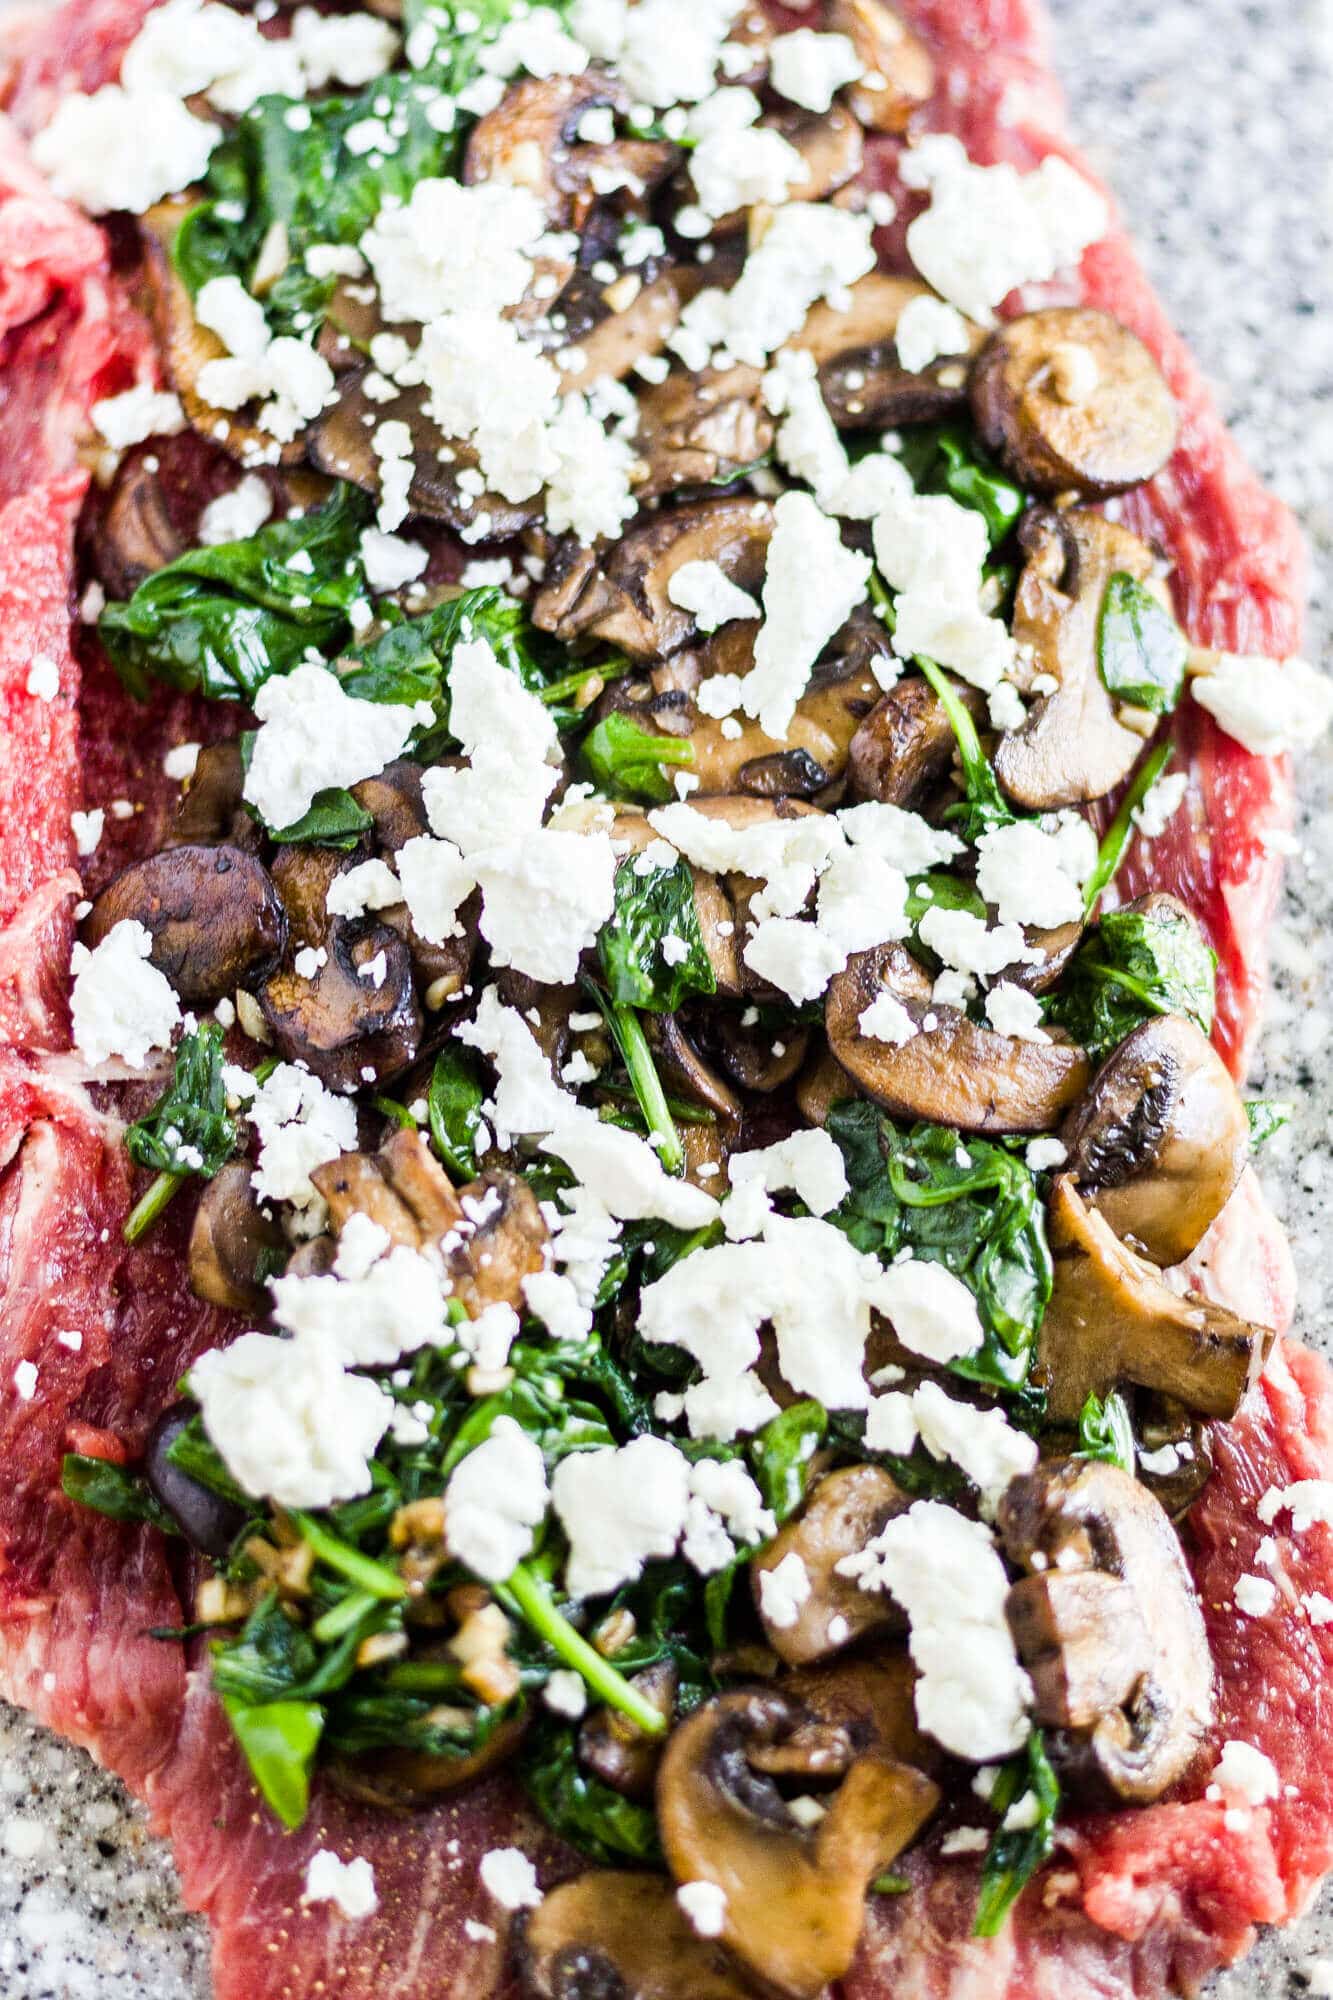 satueed mushrooms and spinach on top of flank steak with goat cheese